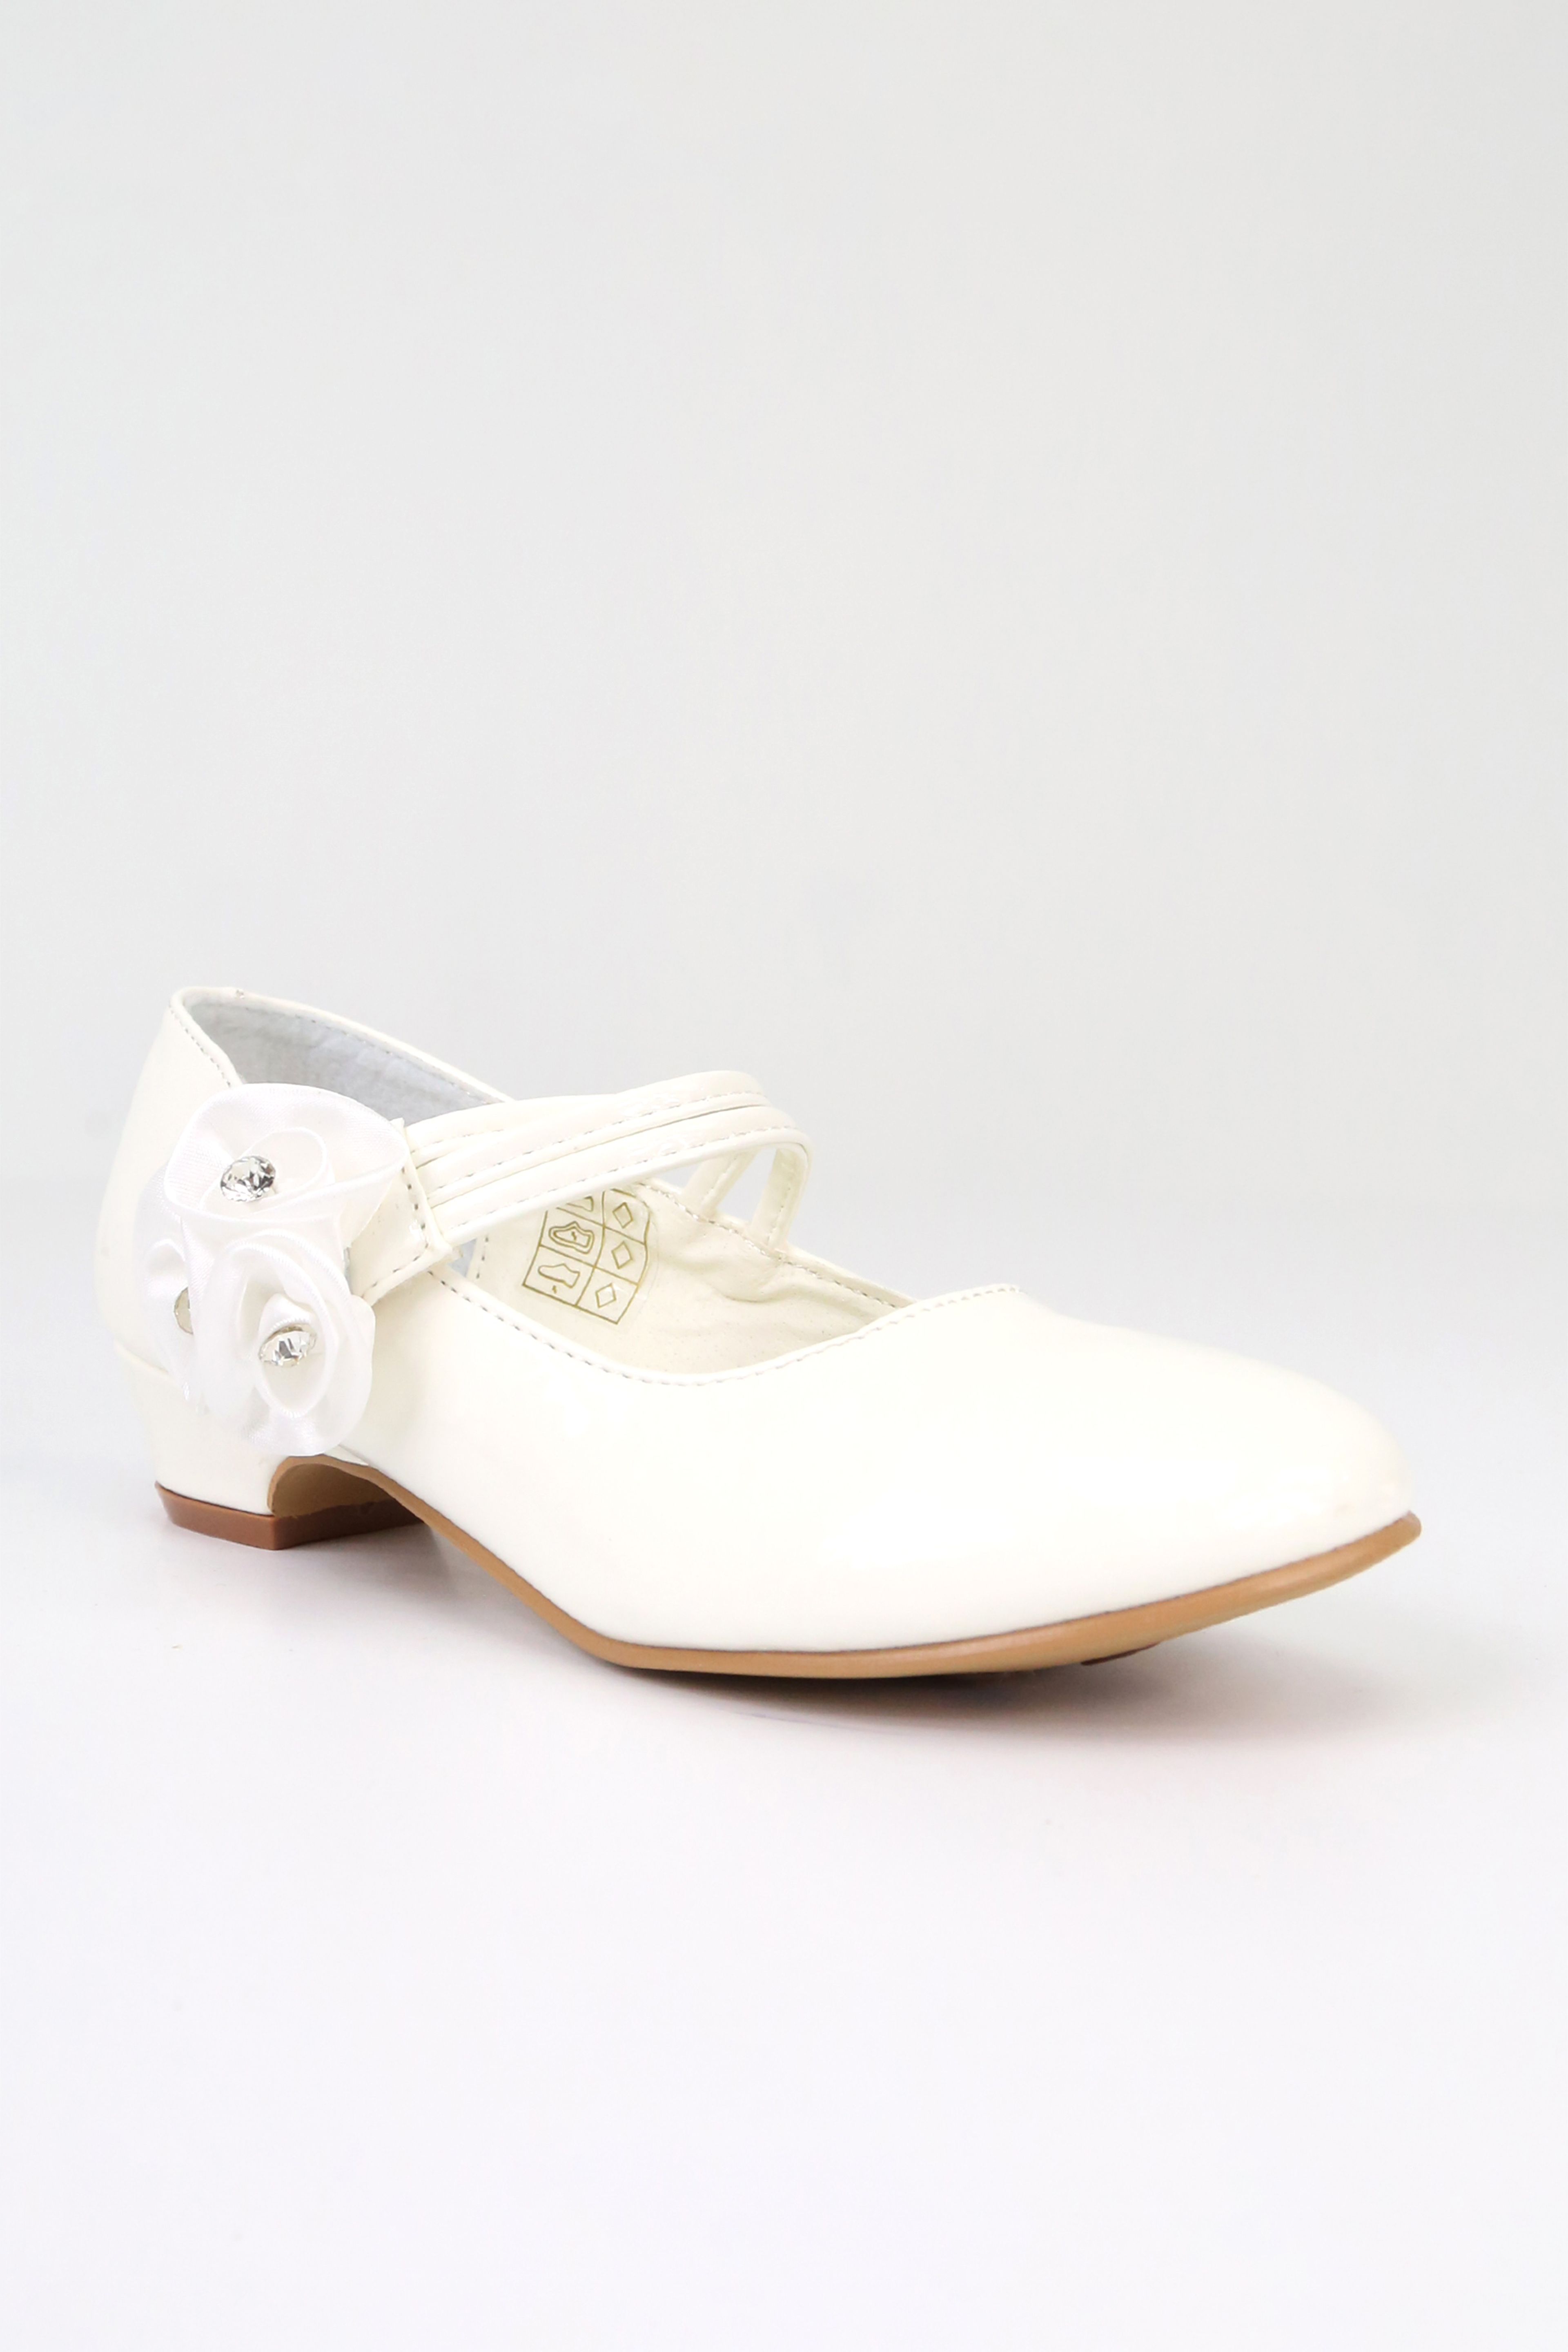 Girls' Mary Jane Low Heal Patent Dress shoes  - Ivory